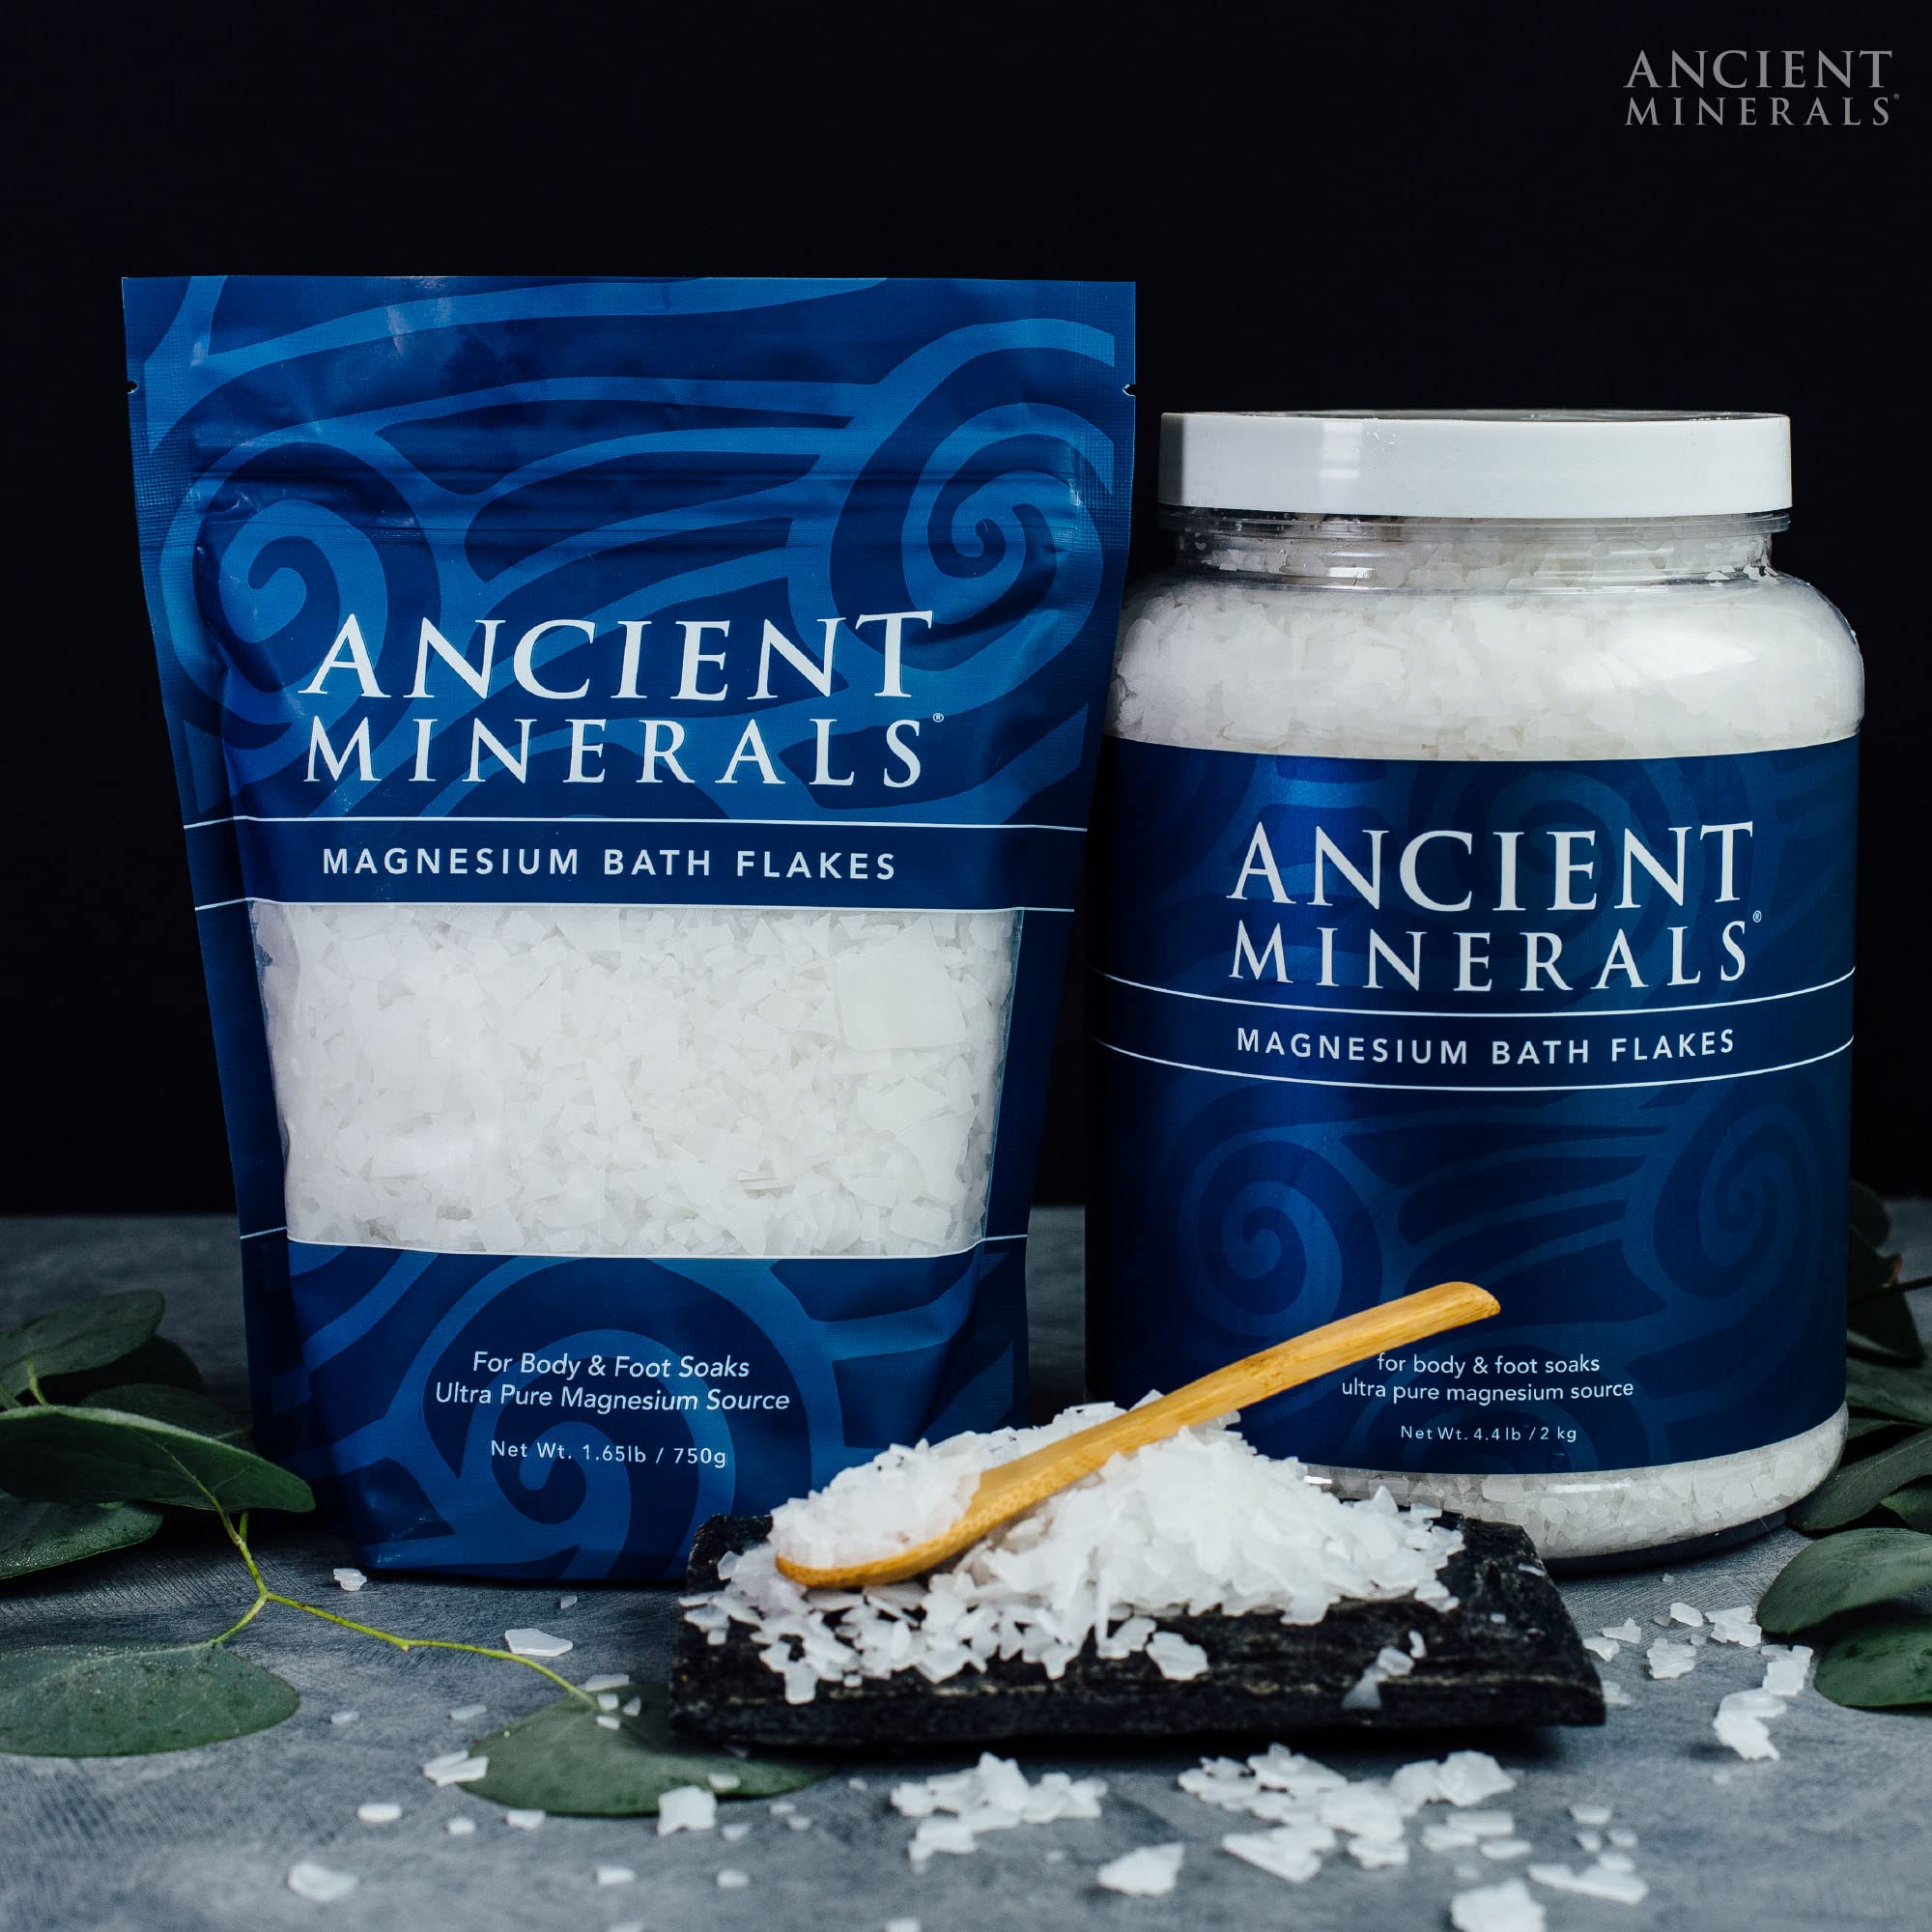 Ancient Minerals Magnesium Bath Flakes - Magnesium Oil Spray and Magnesium Lotion - High-Absorption Efficiency for Relaxation, Wellness & Muscle Relief